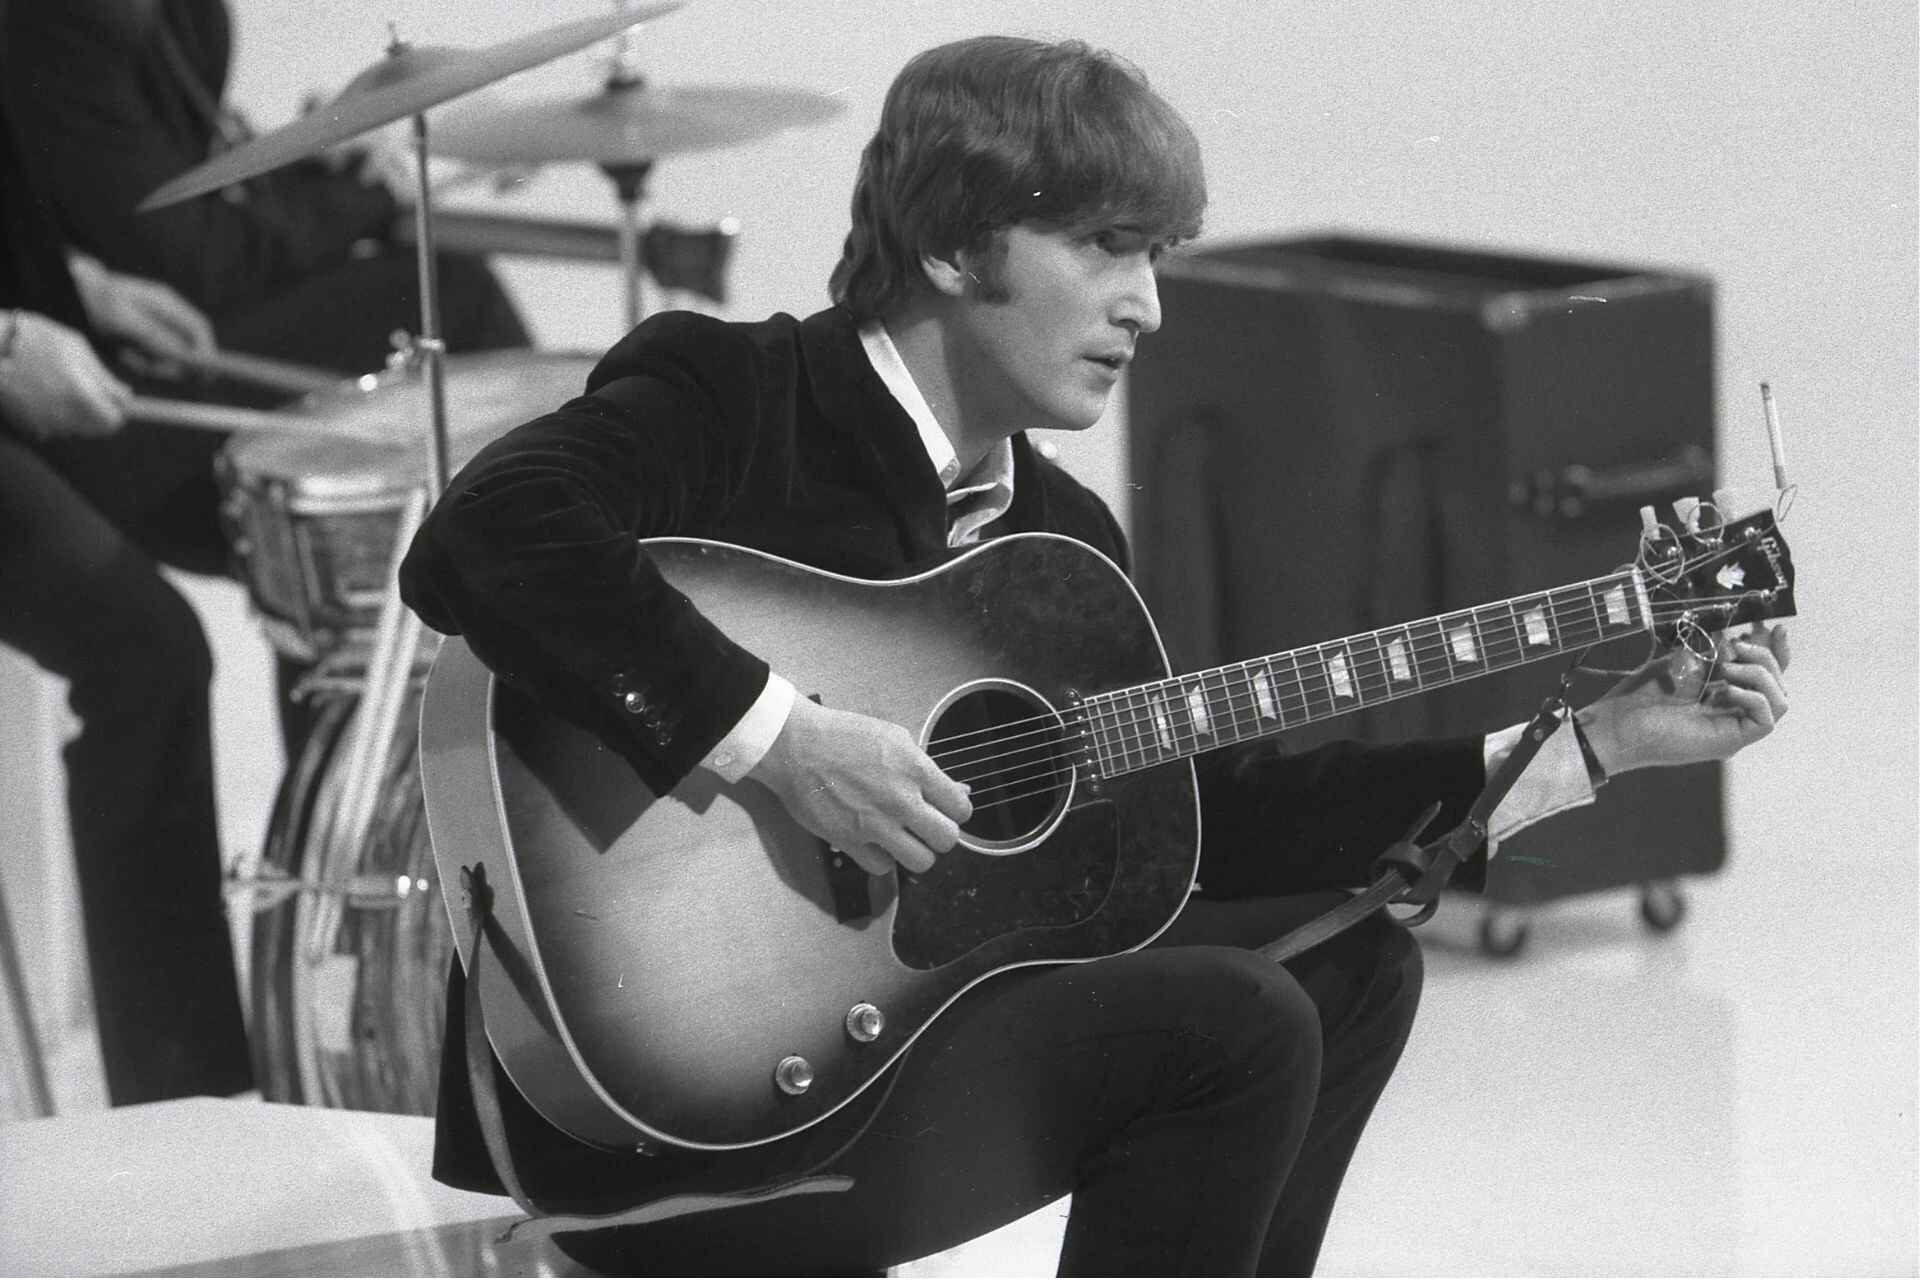 What Acoustic Guitar Did John Lennon Use In The Beatles